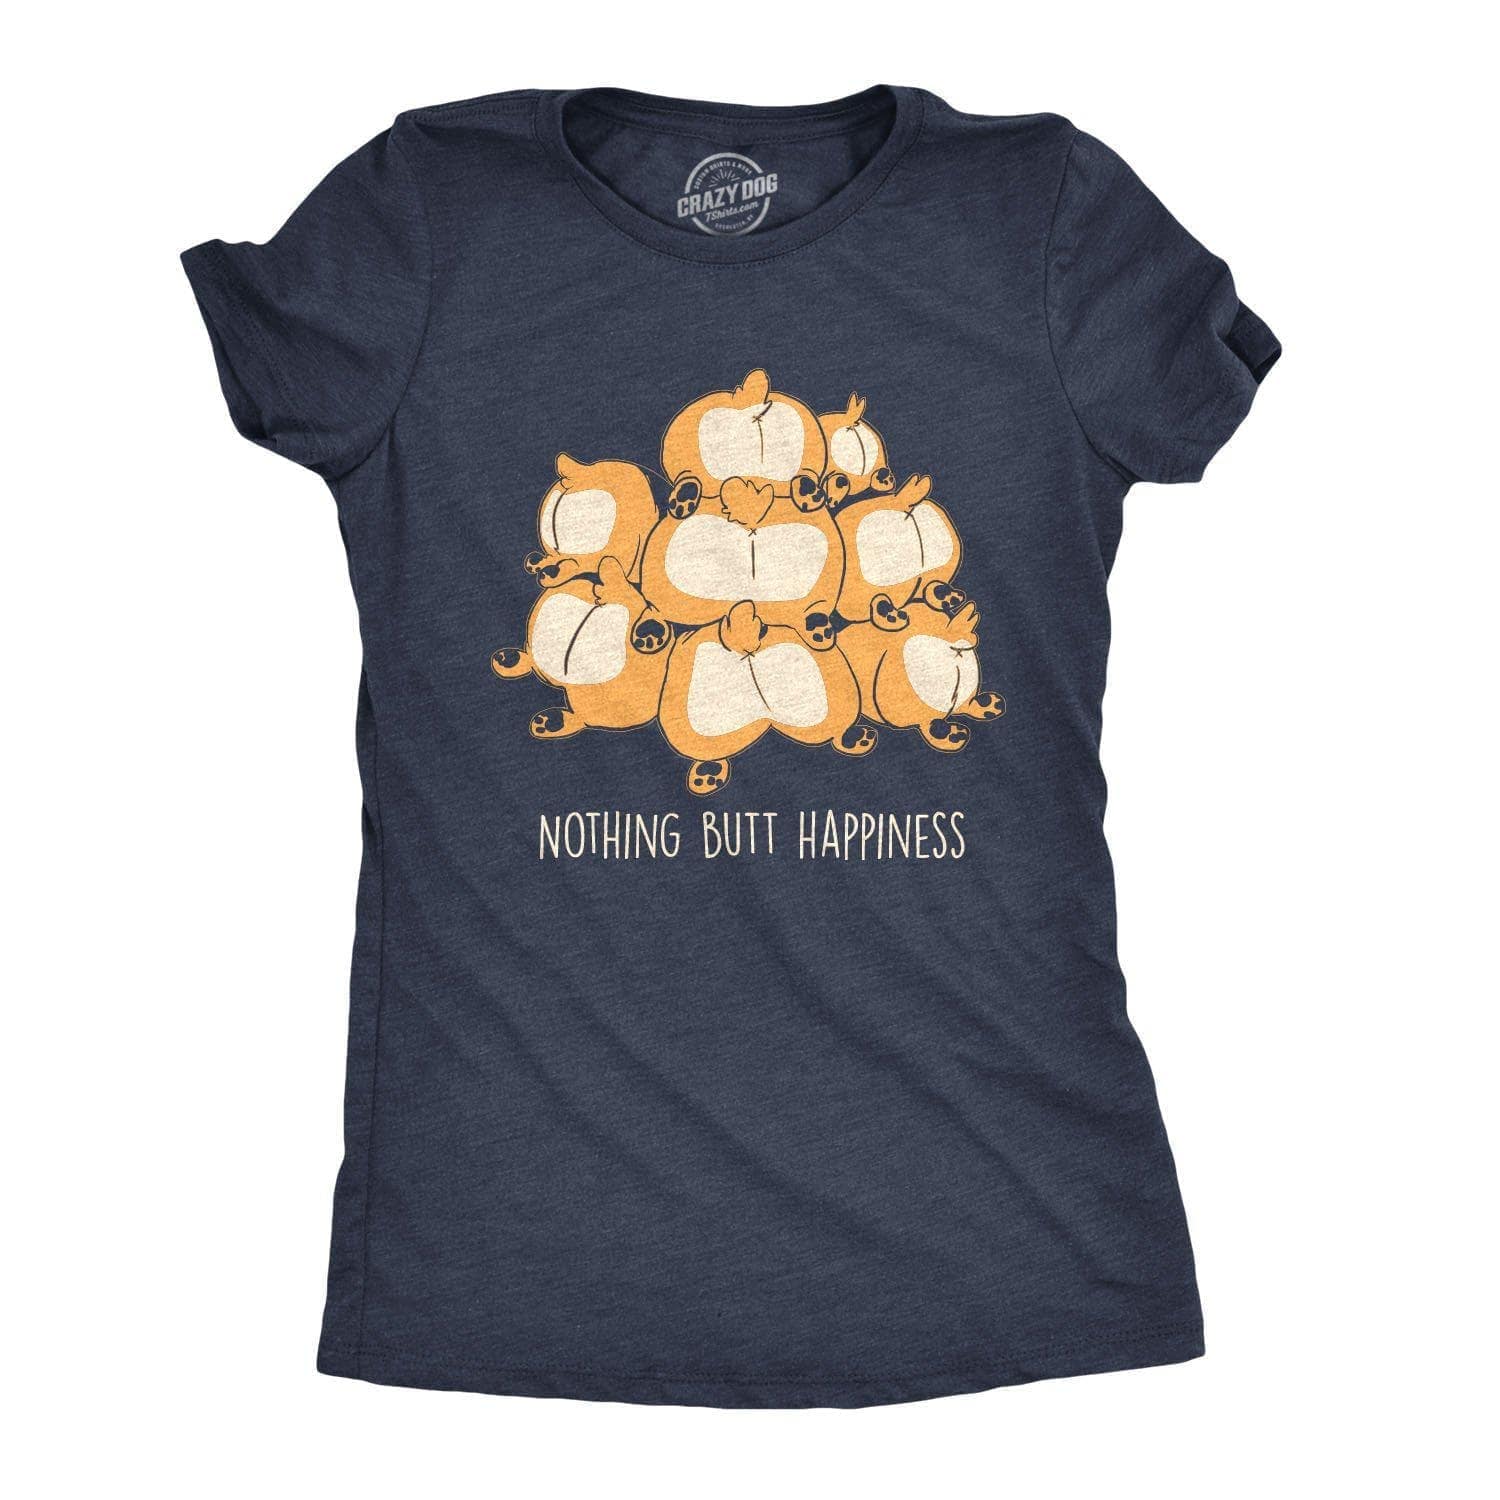 Nothing Butt Happiness Women's Tshirt - Crazy Dog T-Shirts